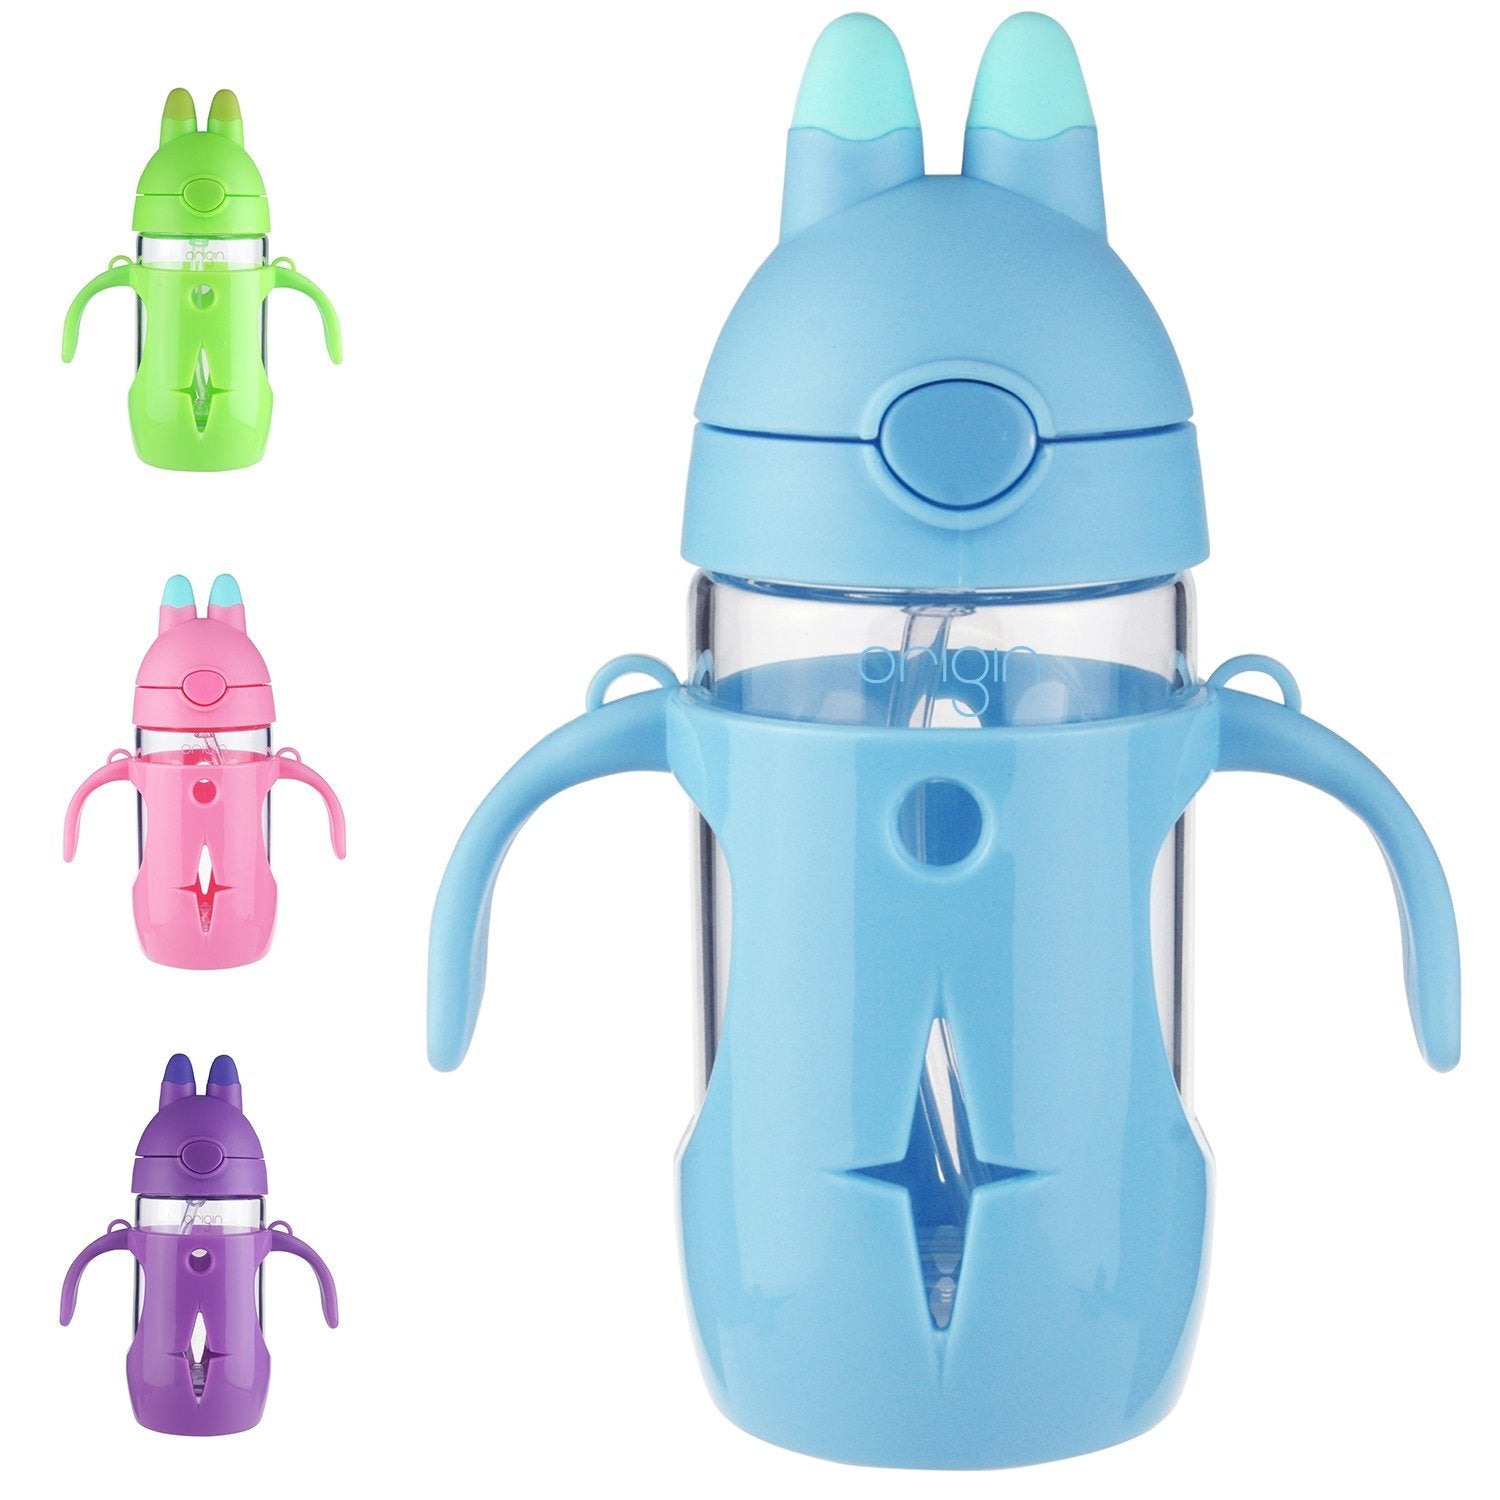 Kids Stainless Steel Water Bottle - Leak Proof with Flip Top Sports Cap & Straw - Toddler Child Friendly Cup